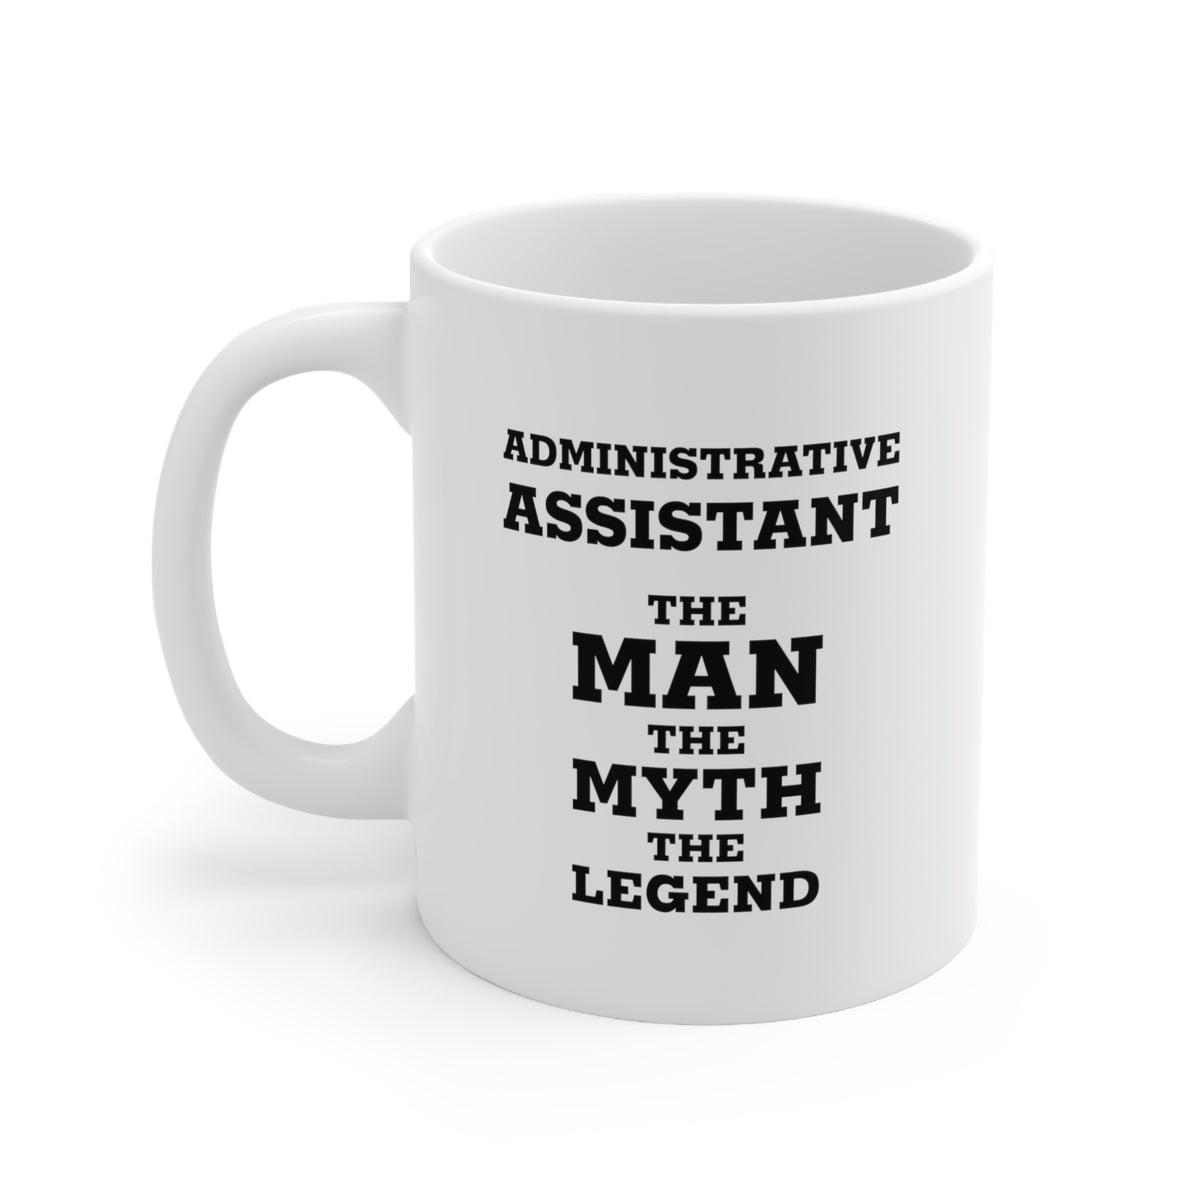 Funny Administrative Assistant Coffee Mug - Administrative Assistant The Man The Myth The Legend - Gag Gift For Admin